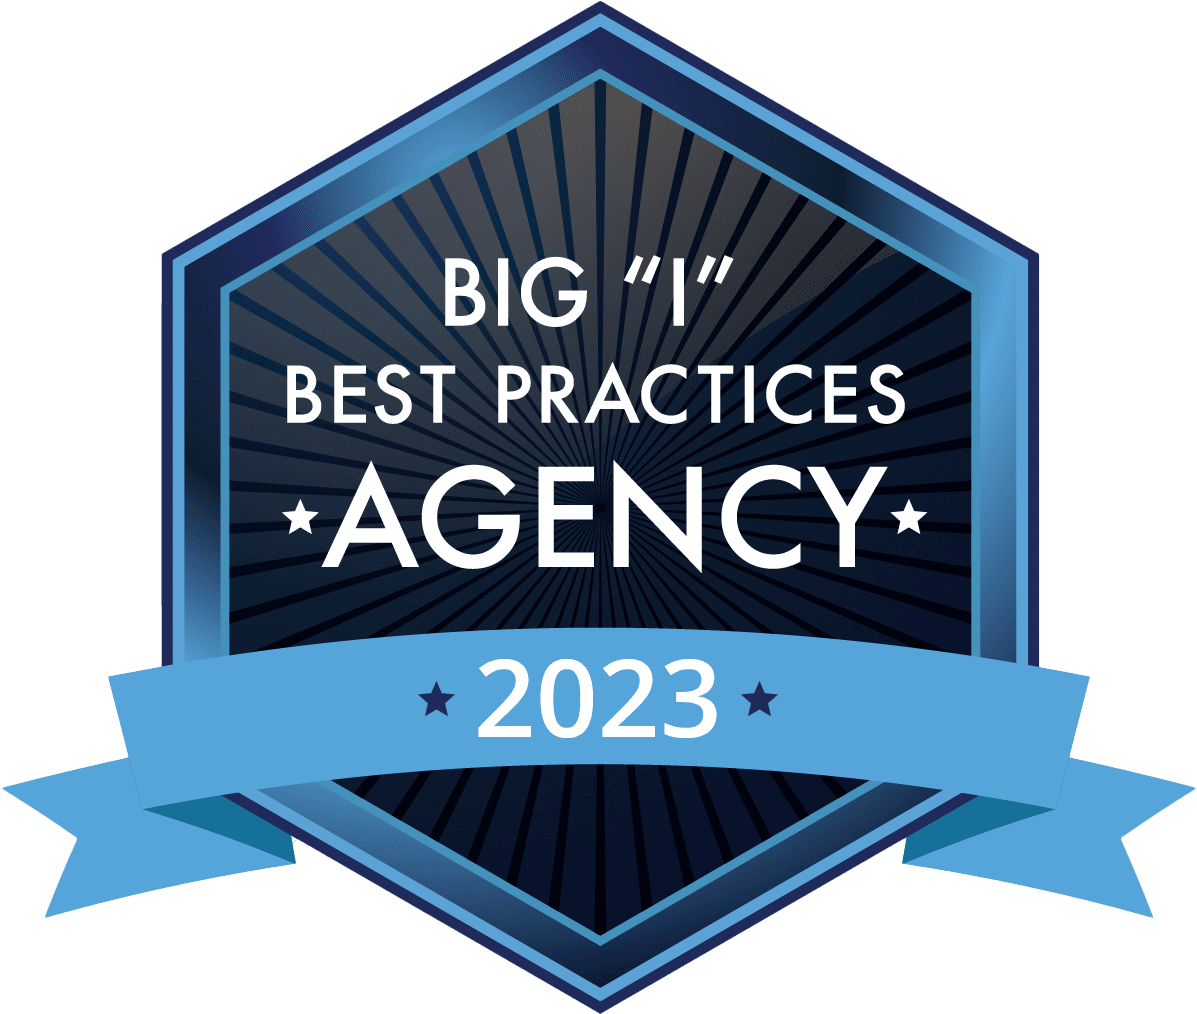 Energy Insurance Agency - Best Agencies to Work For 2023